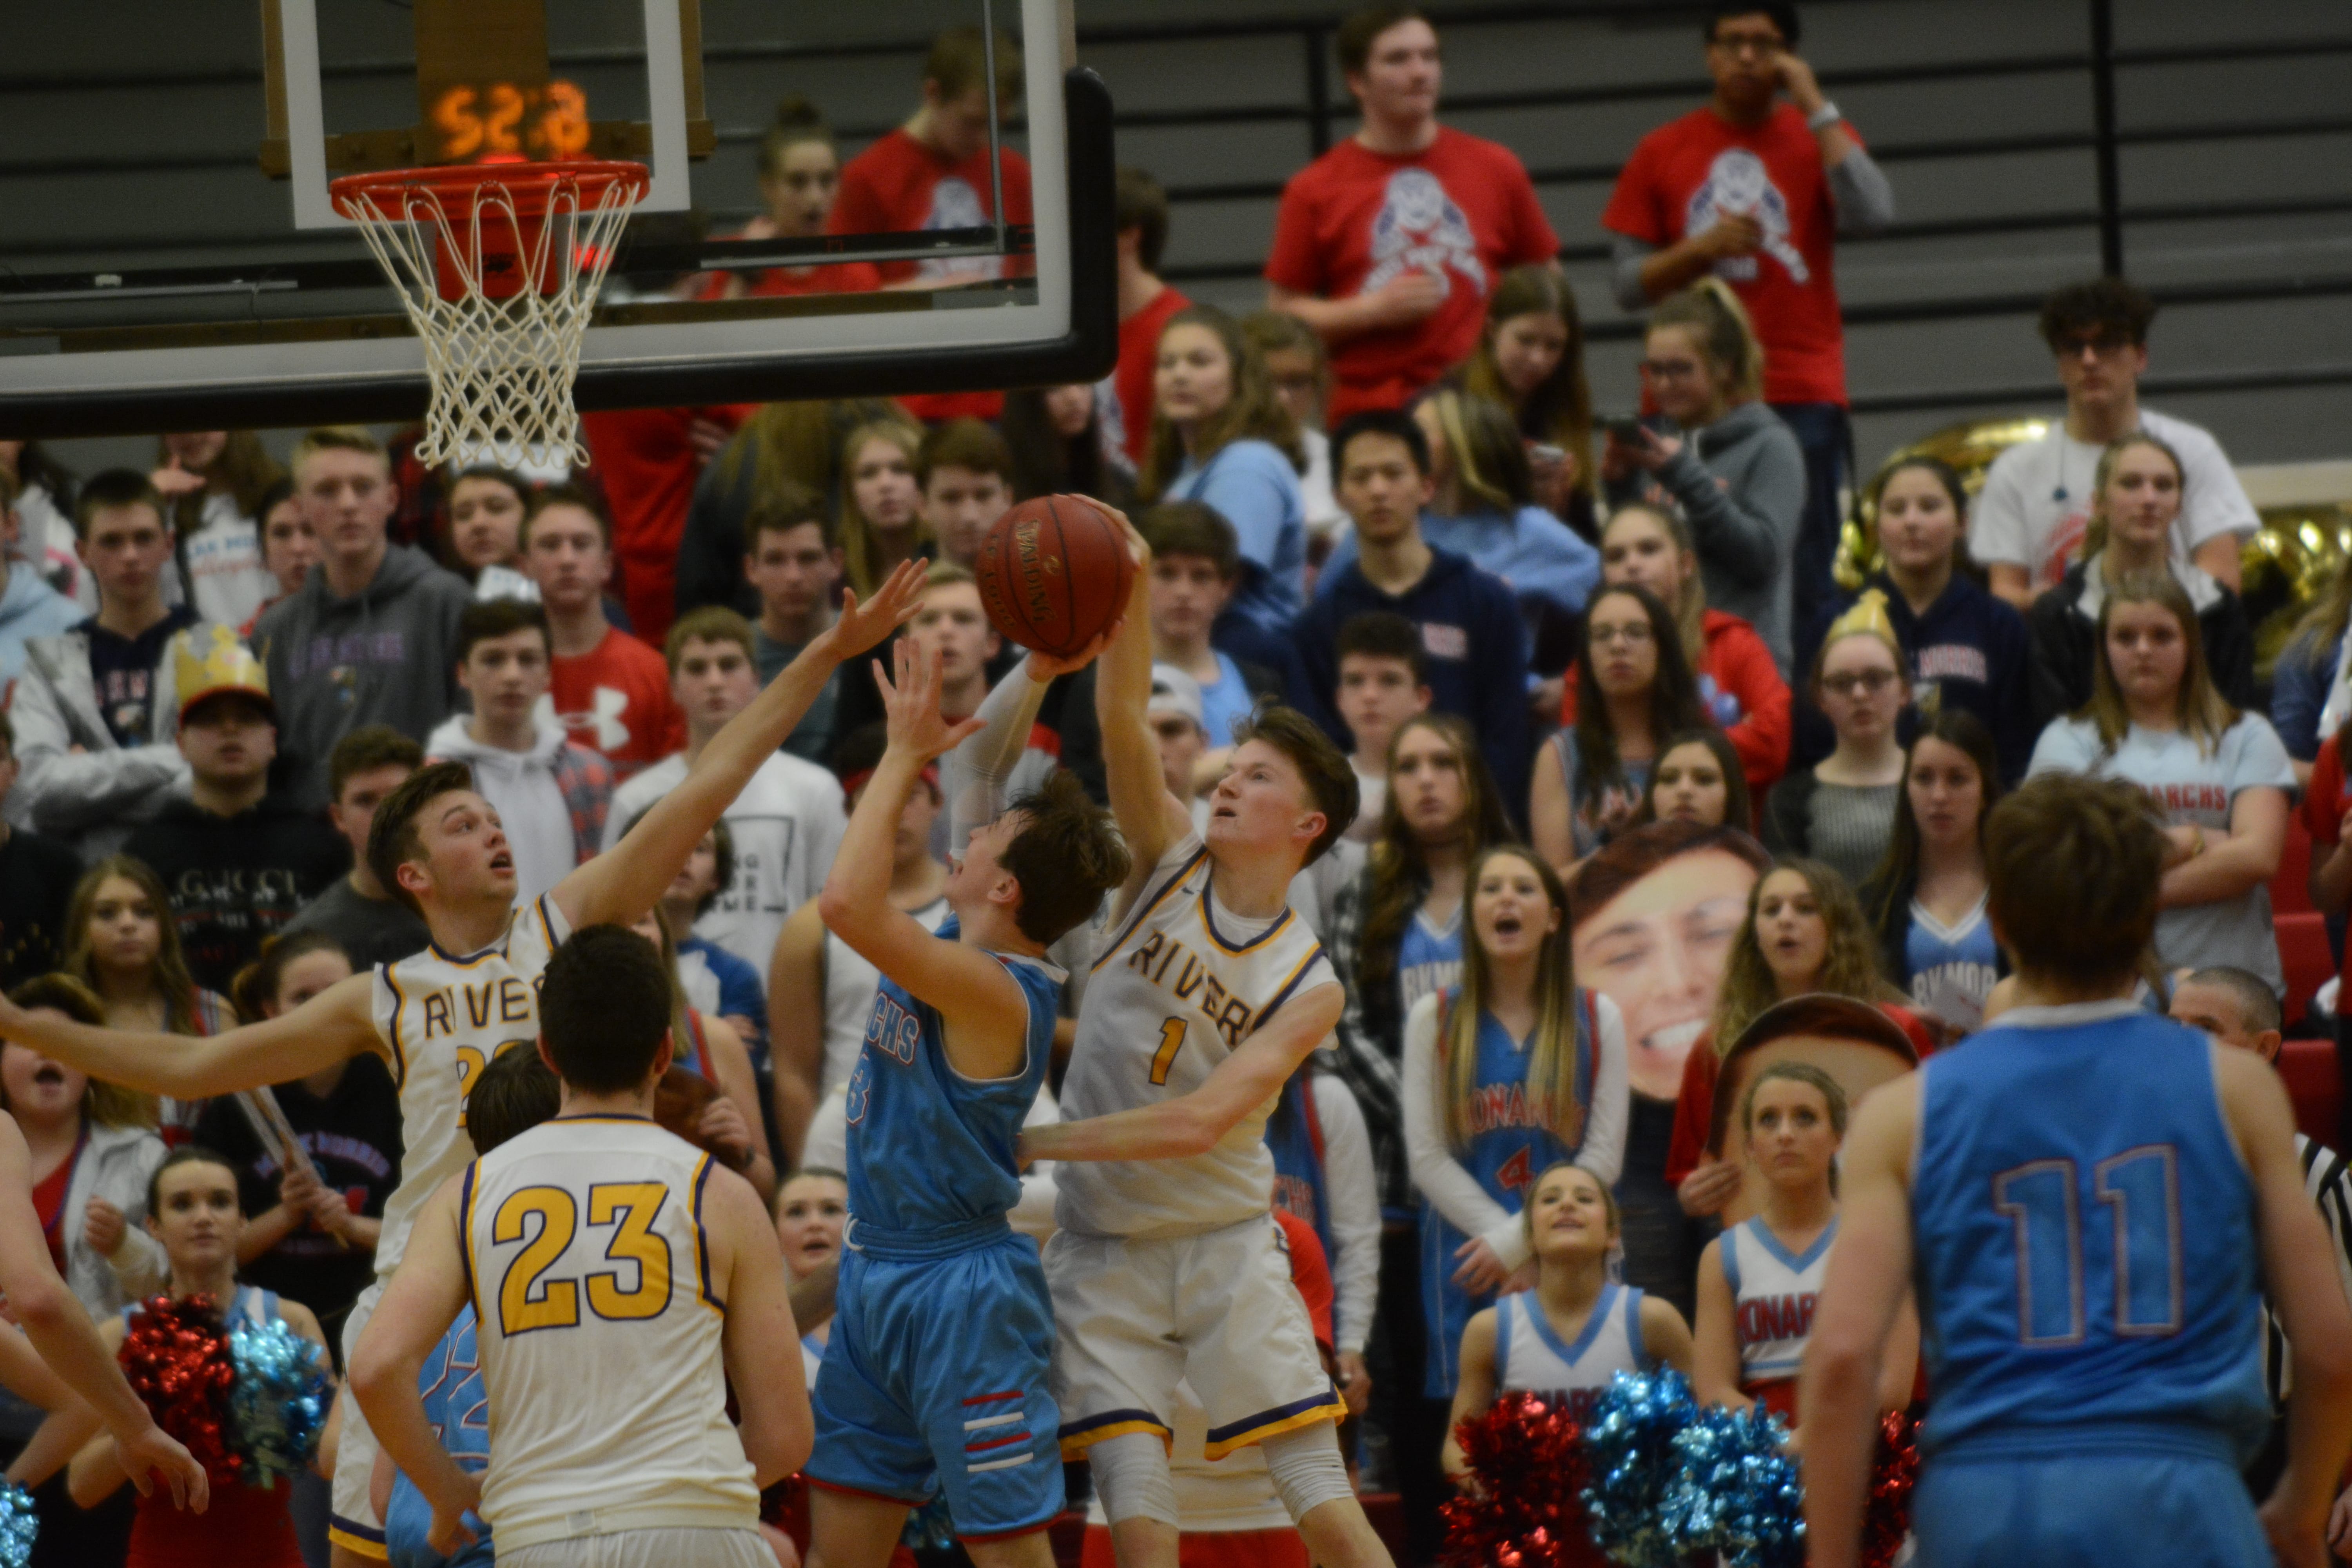 Columbia River guard Nate Snook contests a shot from a Mark Morris guard during a 50-49 loss to the Monarchs in the 2A district championship game at St. Martin's University on Friday, Feb.